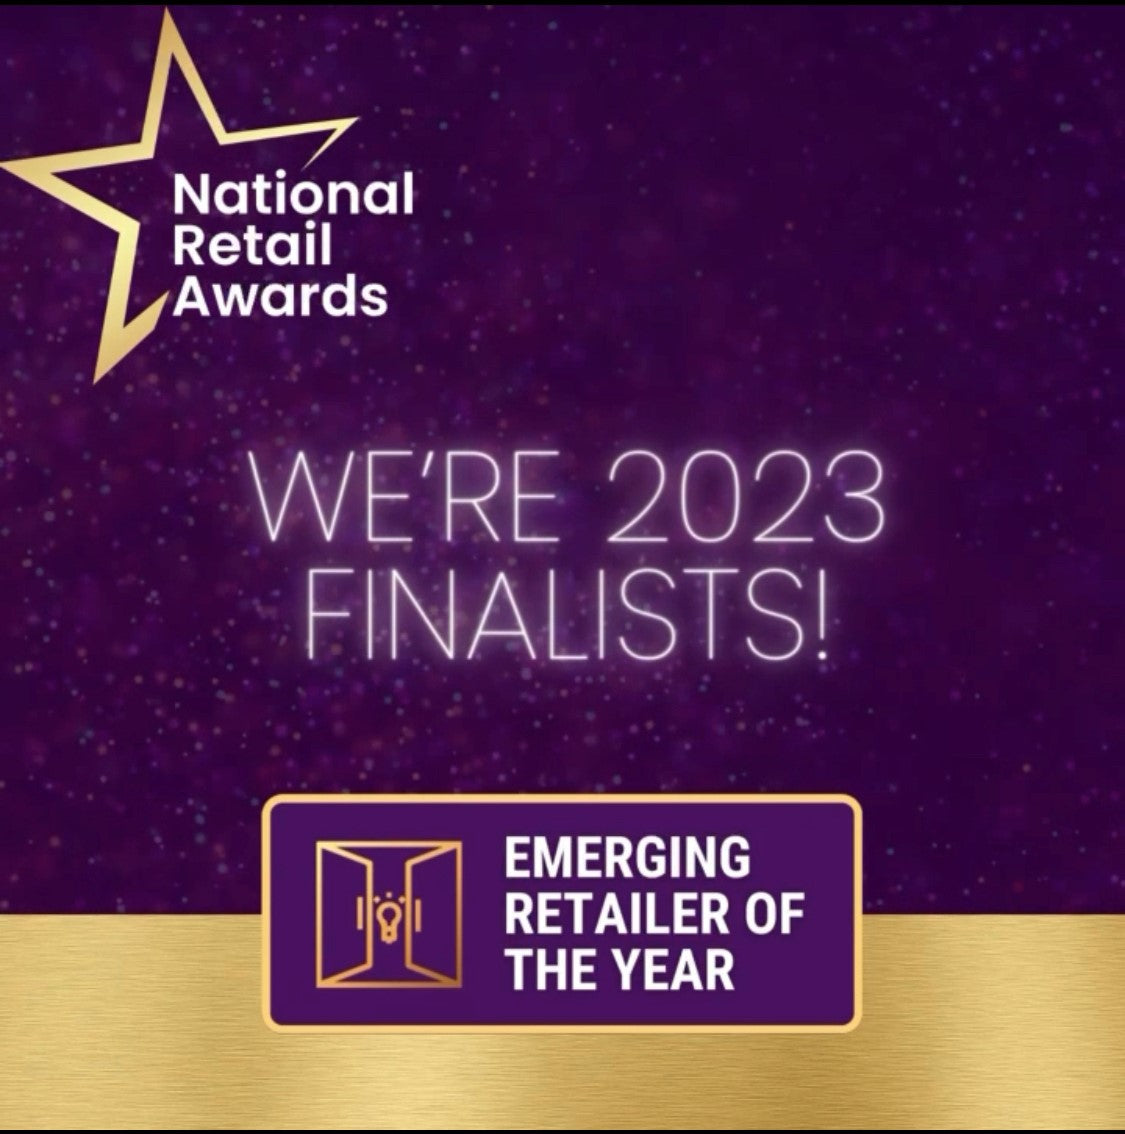 We are finalist in The National Retail Awards in 4 categories!!! Emerging Retailer of the Year 2023